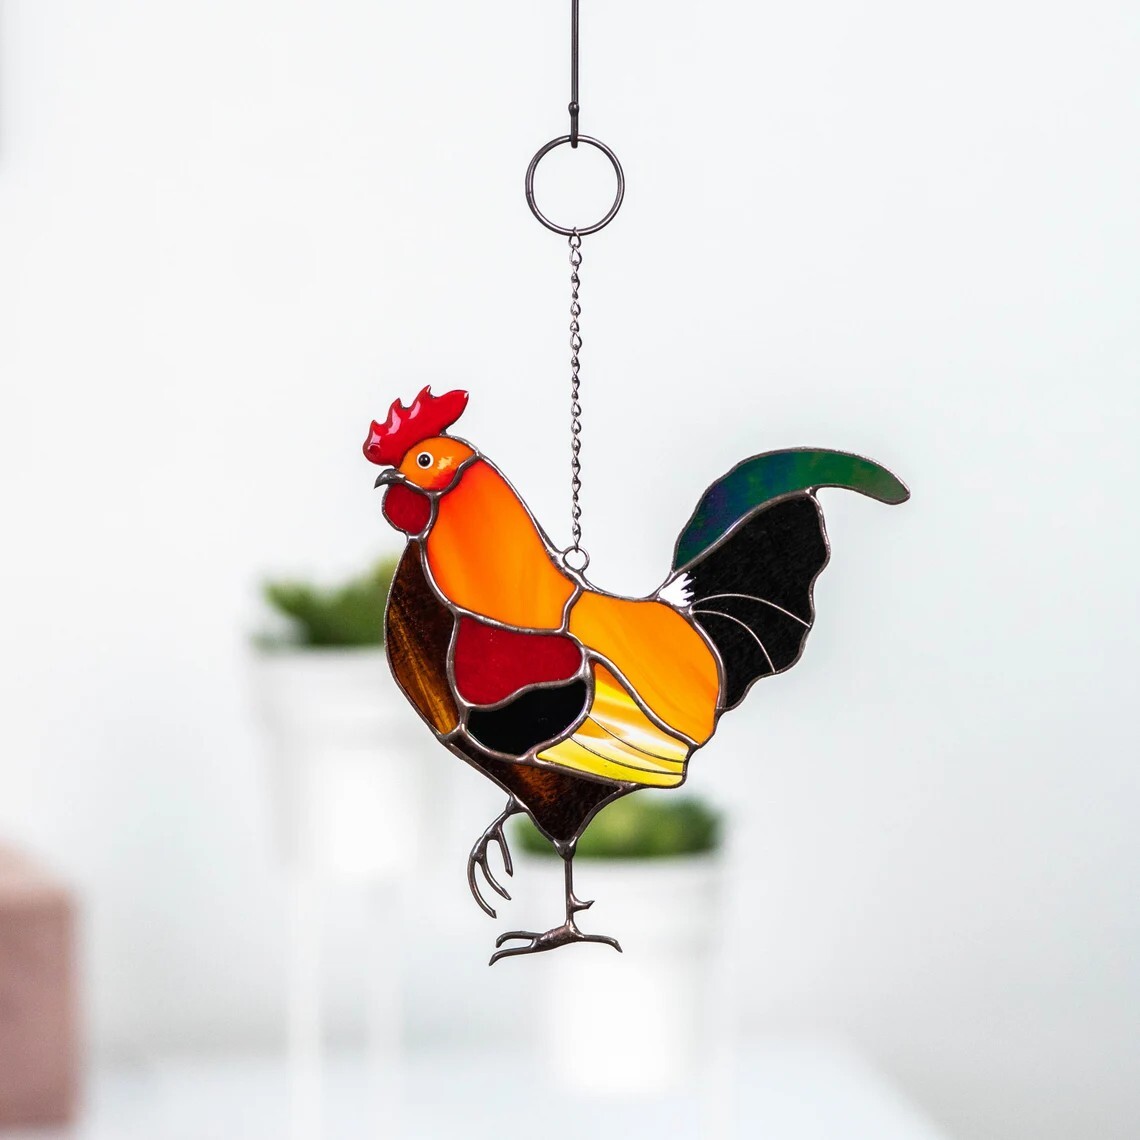 Rooster stained glass window hangings